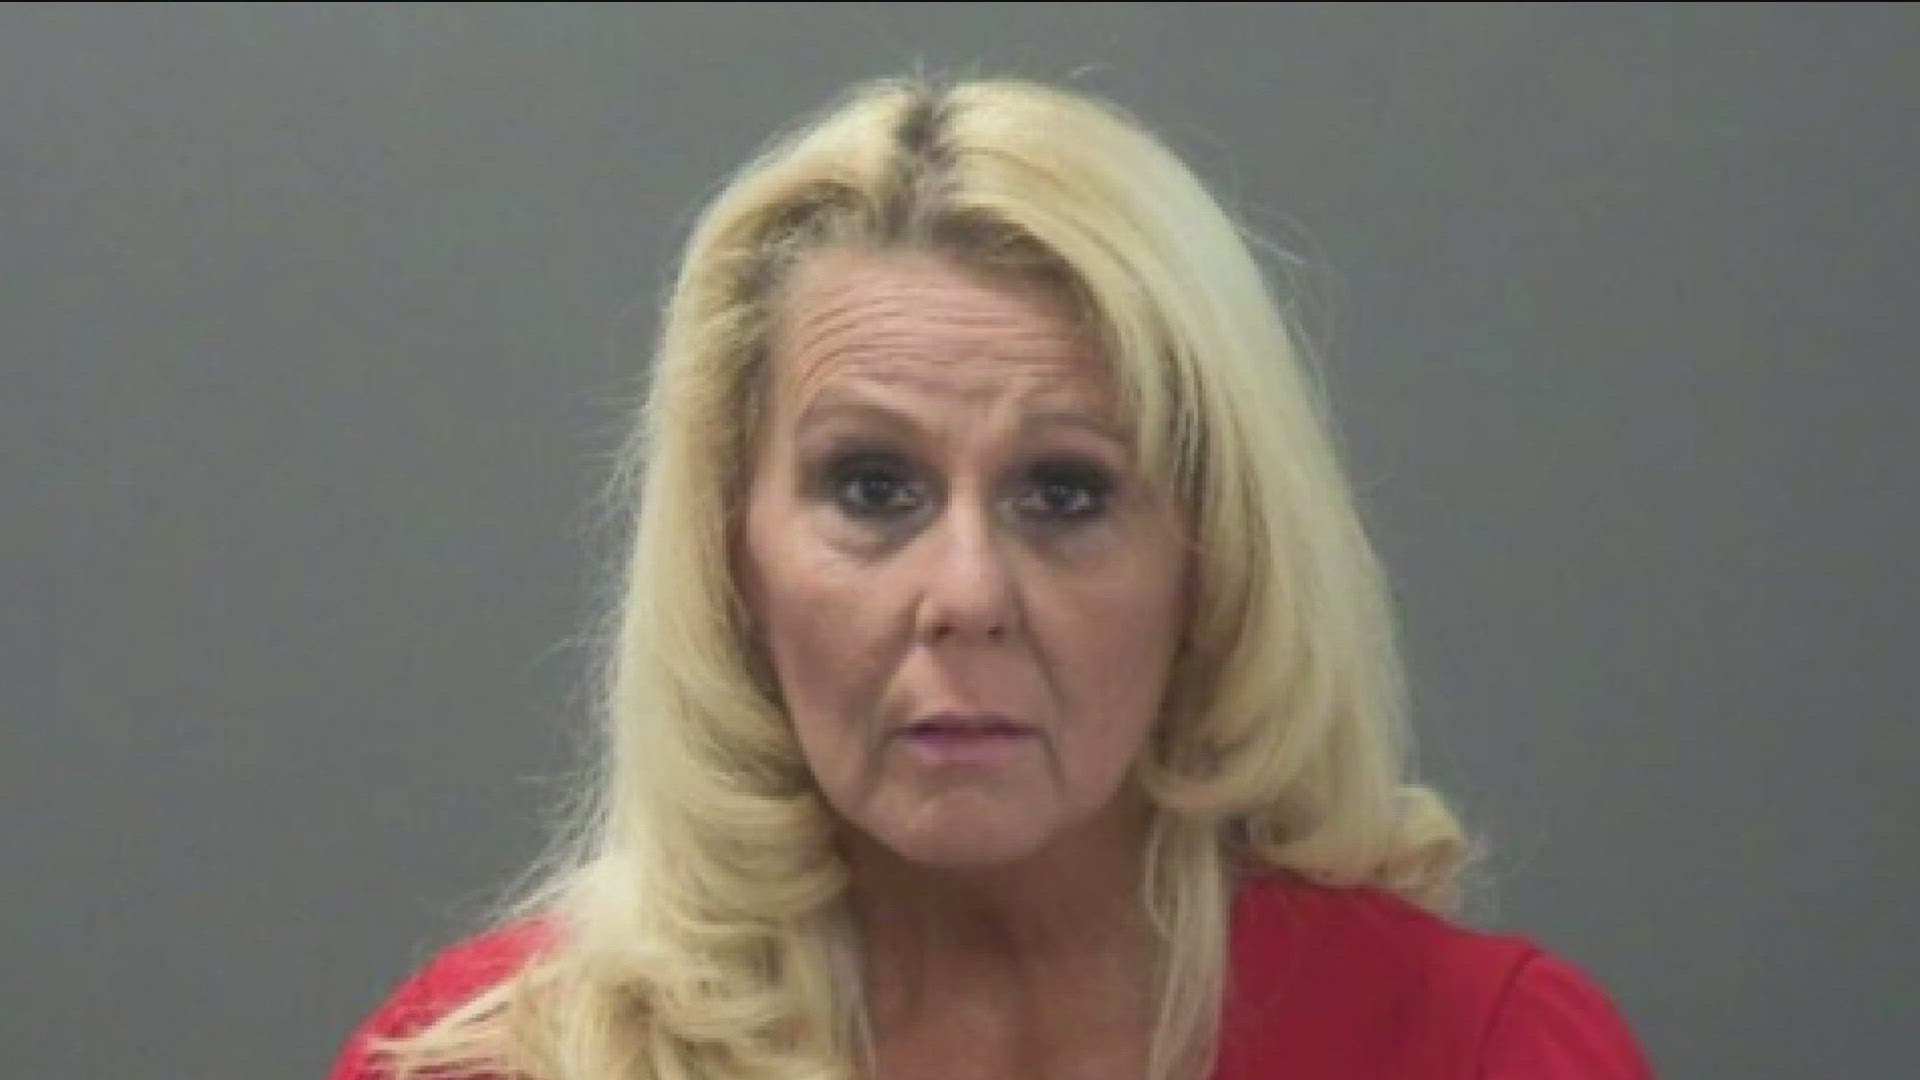 THE BELLA VISTA WOMAN - WHO HAS PLEADED NOT GUILTY TO CHARGES RELATED TO IMPERSONATING A NURSE WHILE WORKING FOR A REHAB FACILITY IN SPRINGDALE...